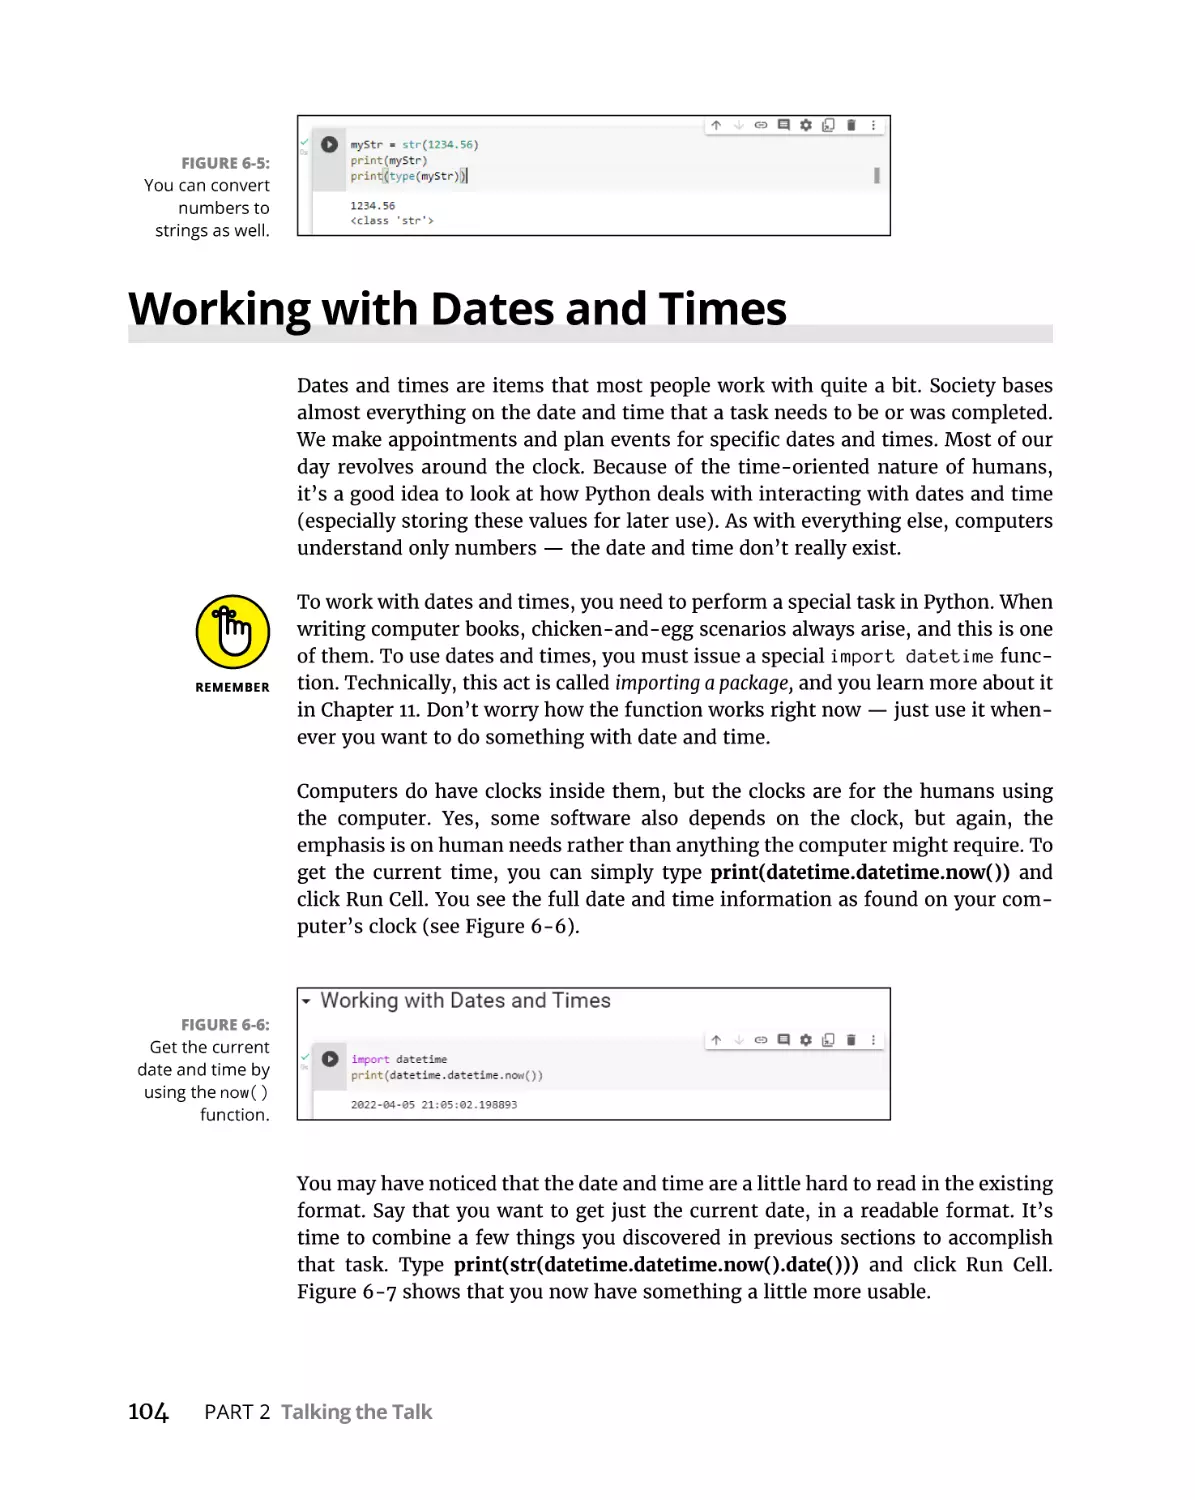 Working with Dates and Times